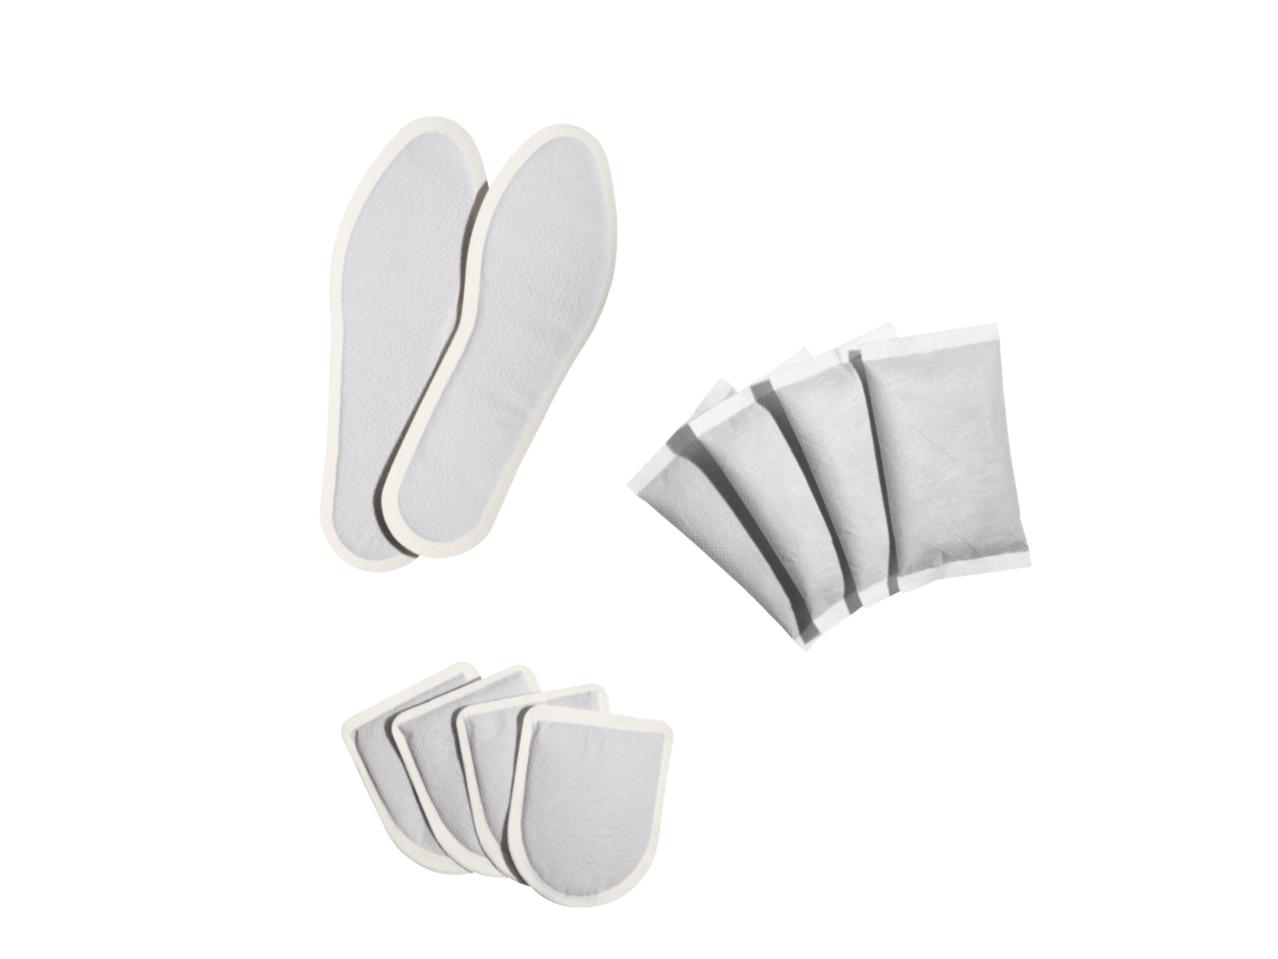 Foot/Hand Warmer/ Thermal Insoles